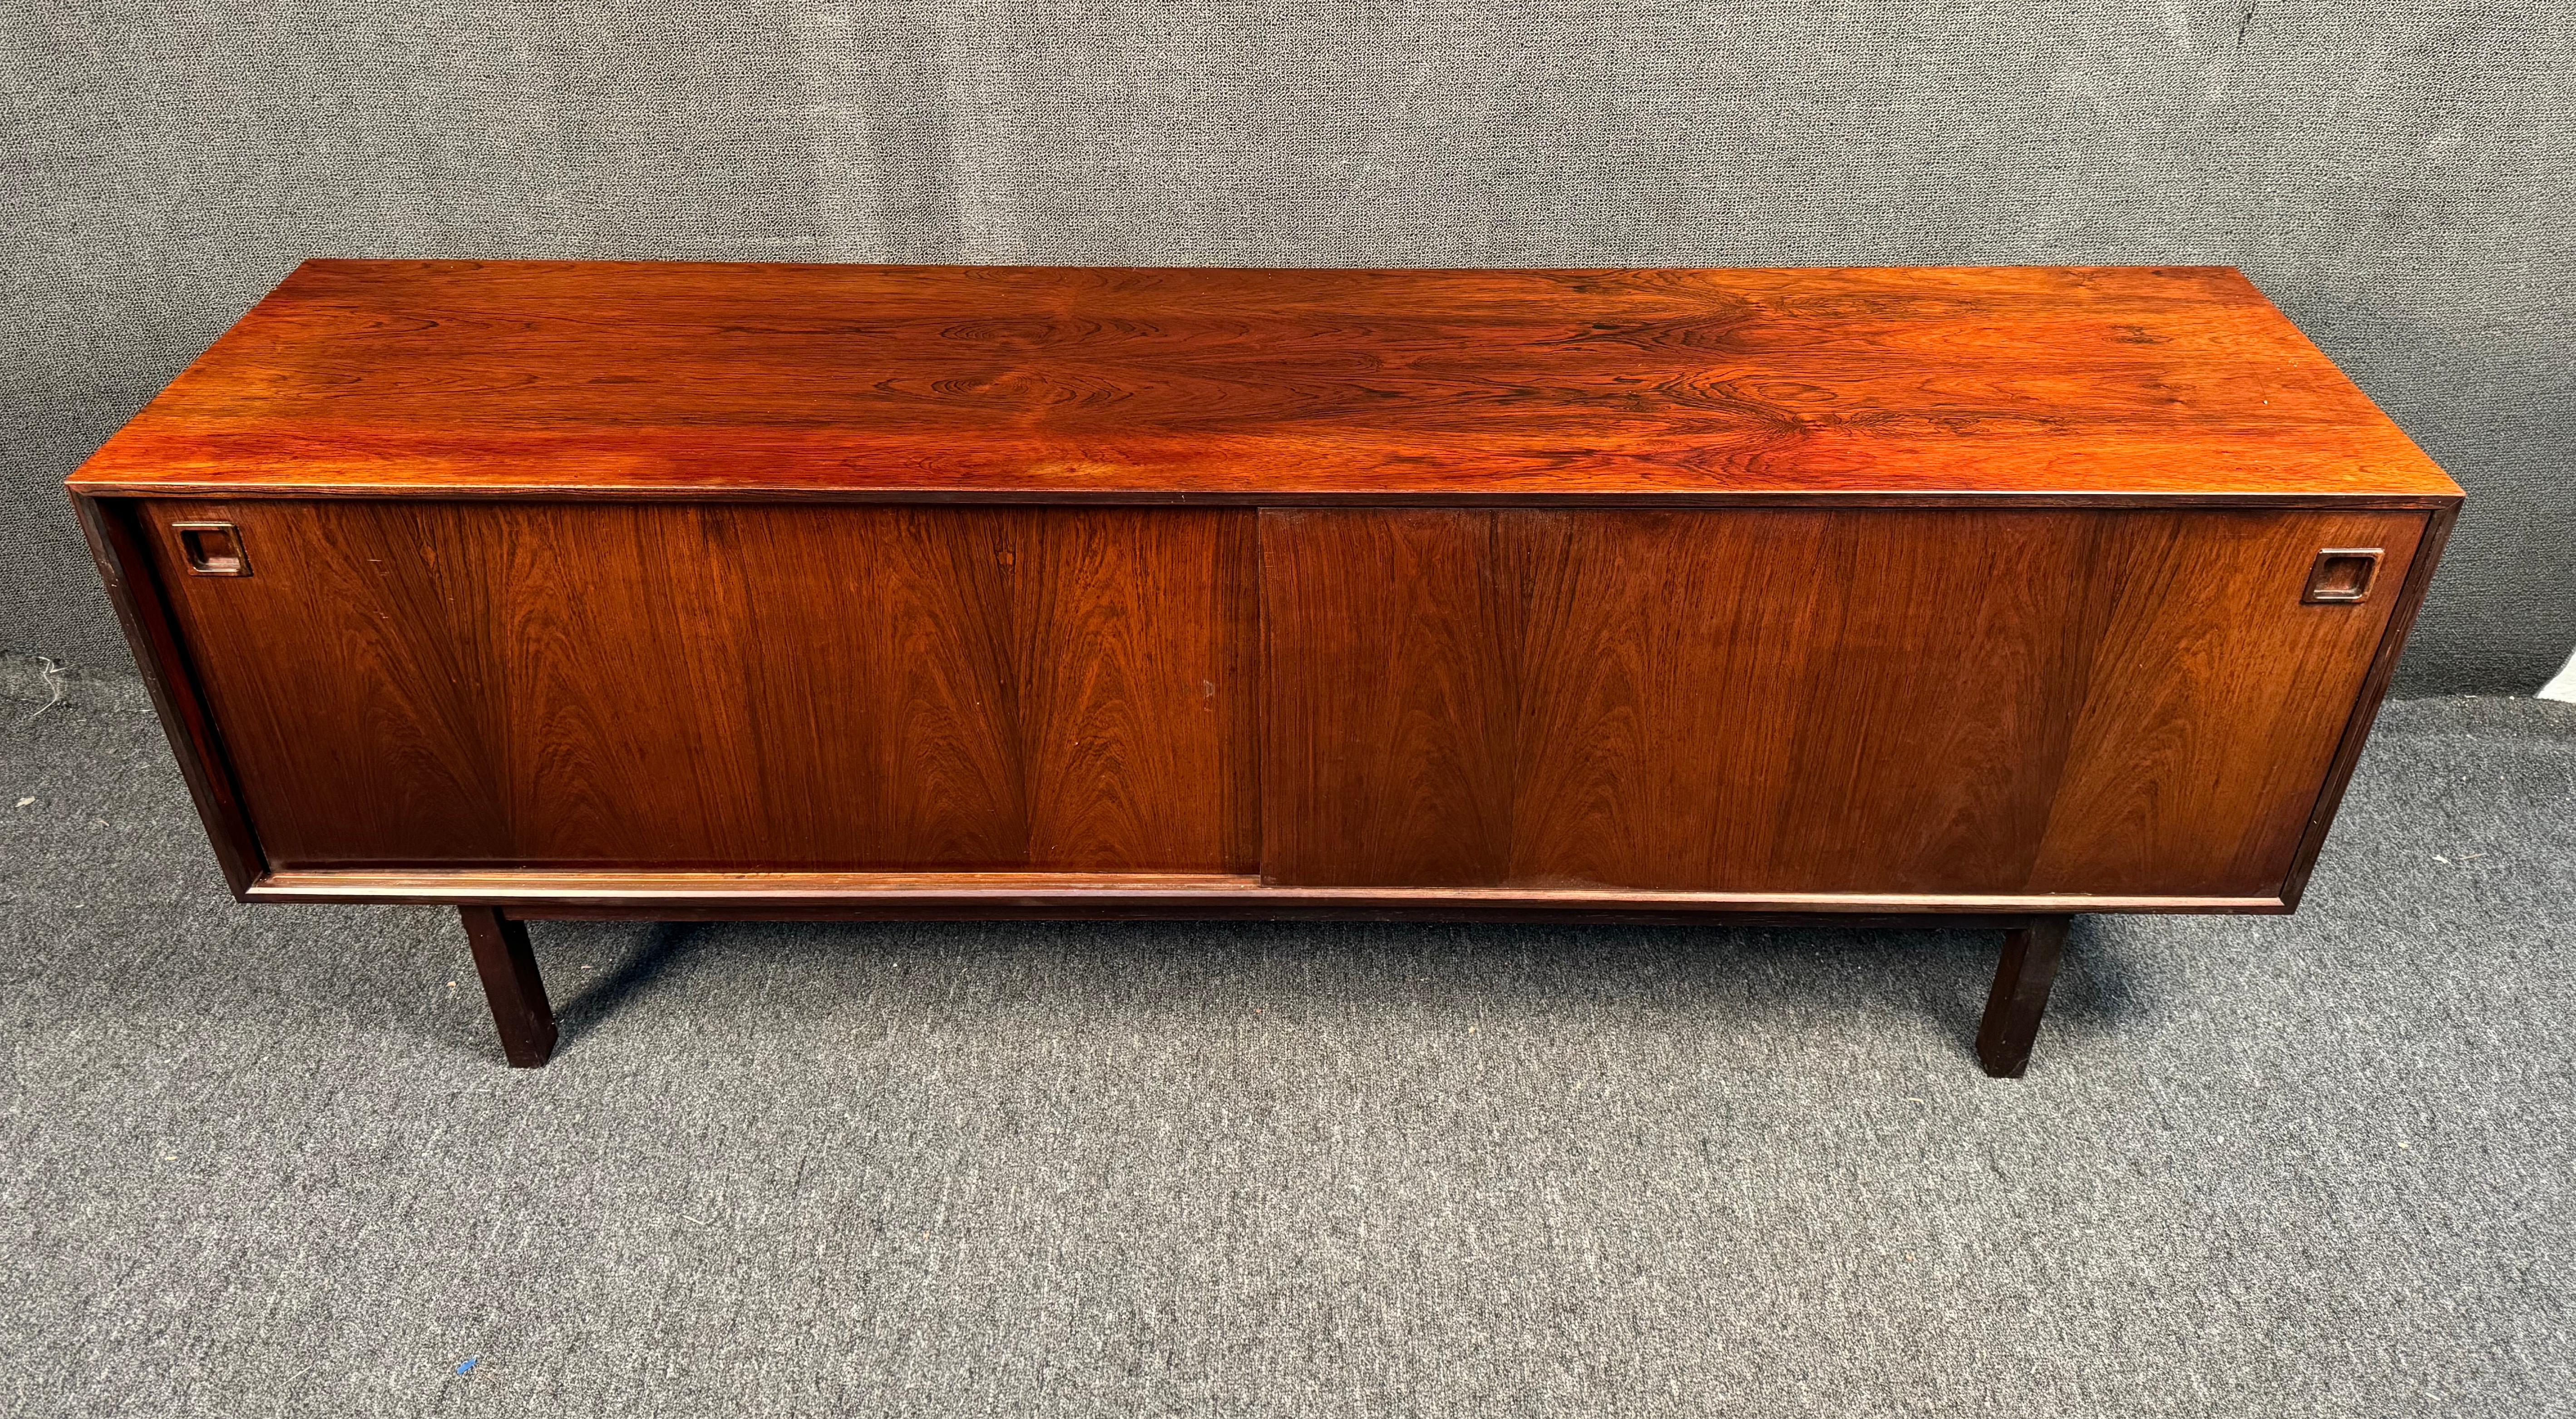 The elegant modern style of Scandinavian designer Gunni Oman sets this sliding door Rosewood sideboard apart from other Mid-Century servers. Featuring four felt lined drawers, spacious cabinet space, and rich vintage finish this unique piece for